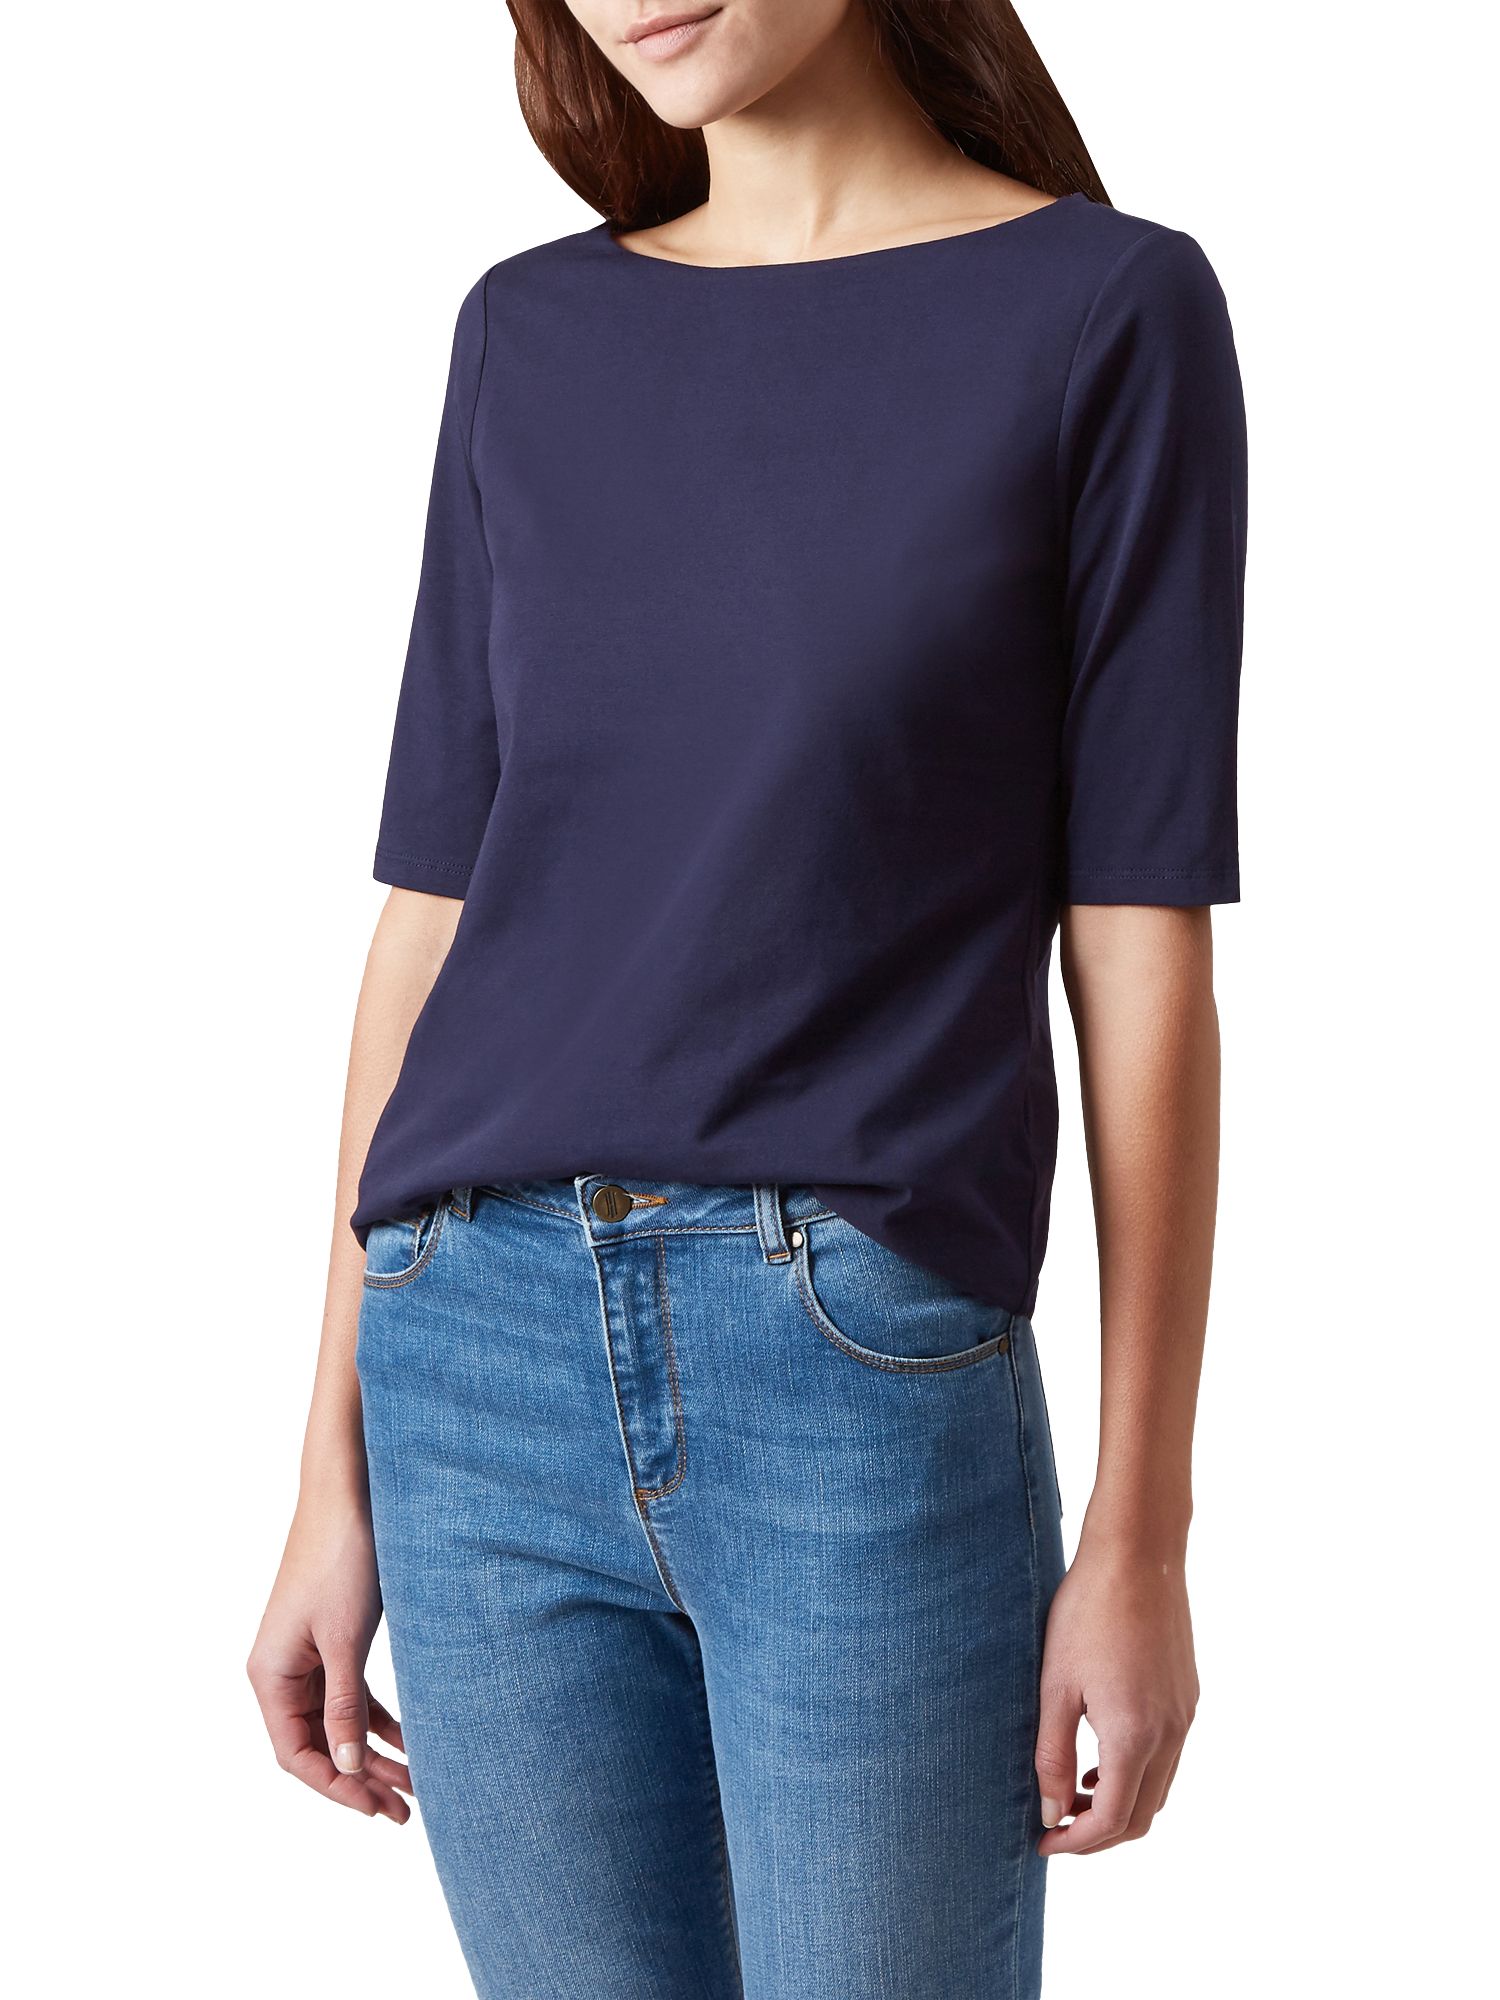 Hobbs Paige Top, French Blue, S